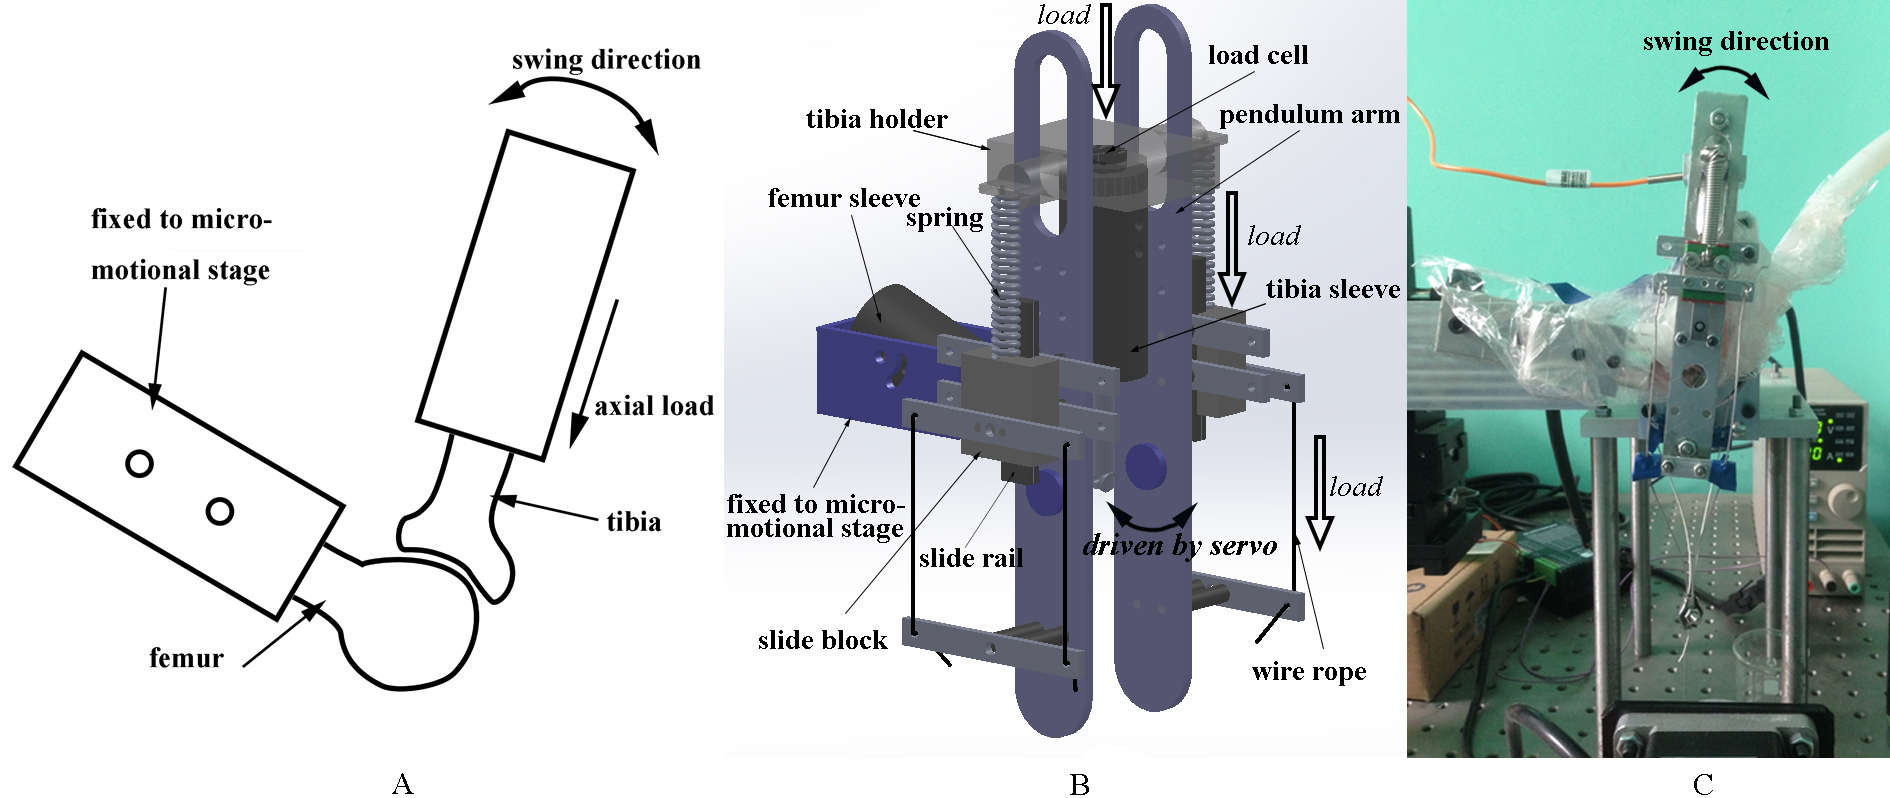 Custom-designed wear test device. A) Schematic diagram of the wear test device. B) 3D model of the wear test device. a-tibia holder; b-load cell; c-pendulum arm; d-tibia sleeve; e-wire rope; f-slide rail; g-slide block; h-femur sleeve; i-spring. C) Running wear test device with a specimen and the semi-enclosed space.